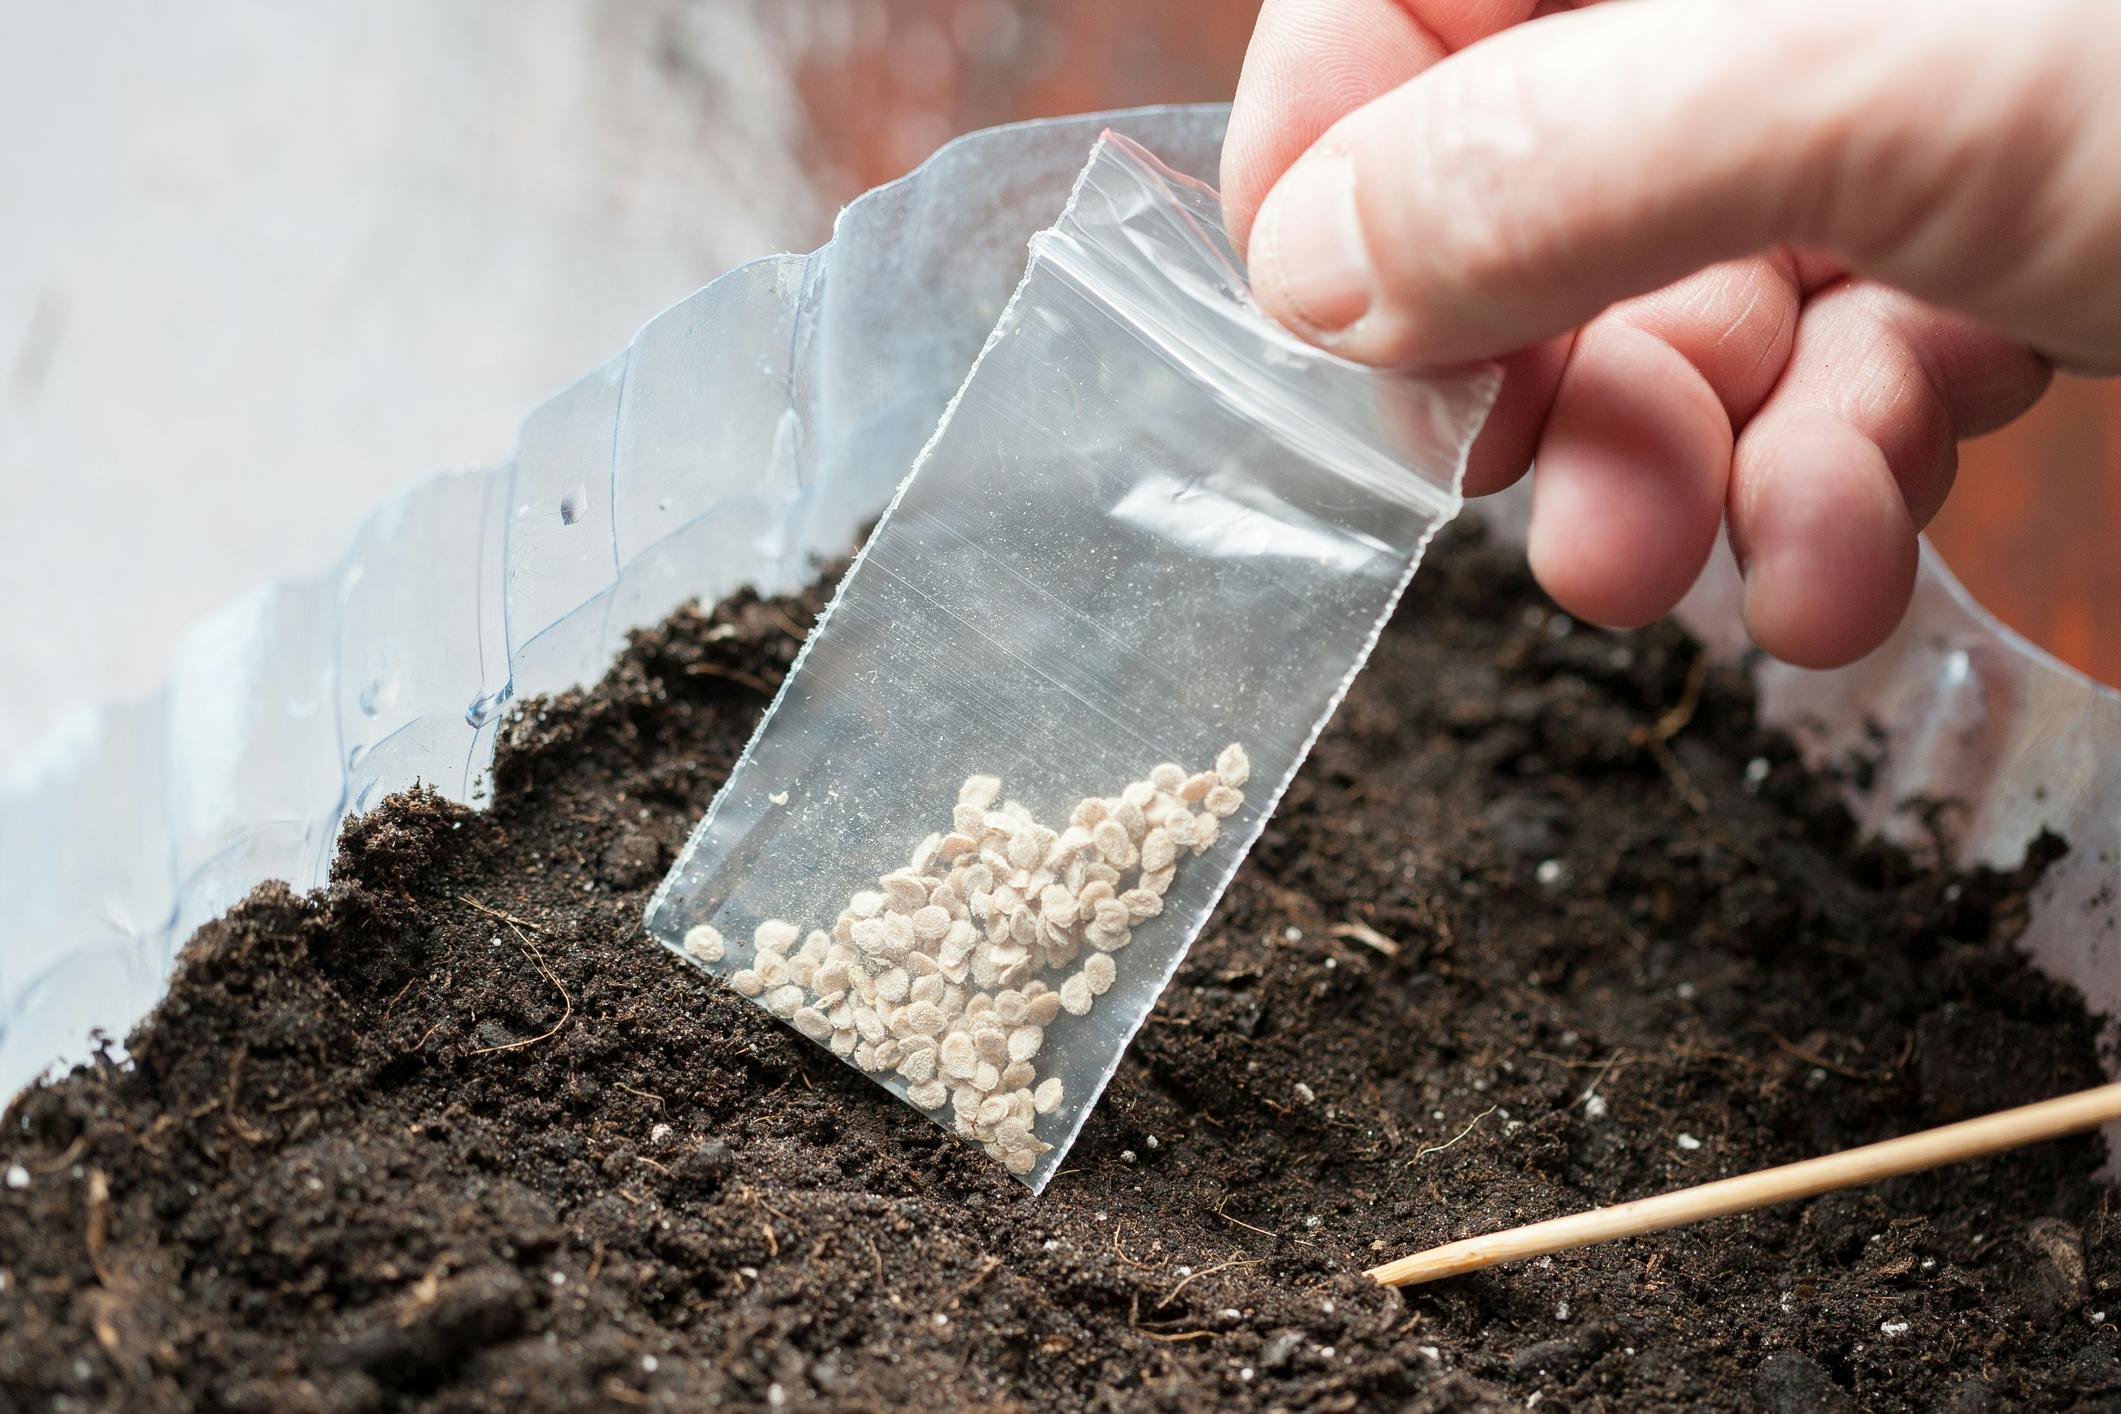 hold package with seeds for planting seedlings. farmer plant vegetables plants.